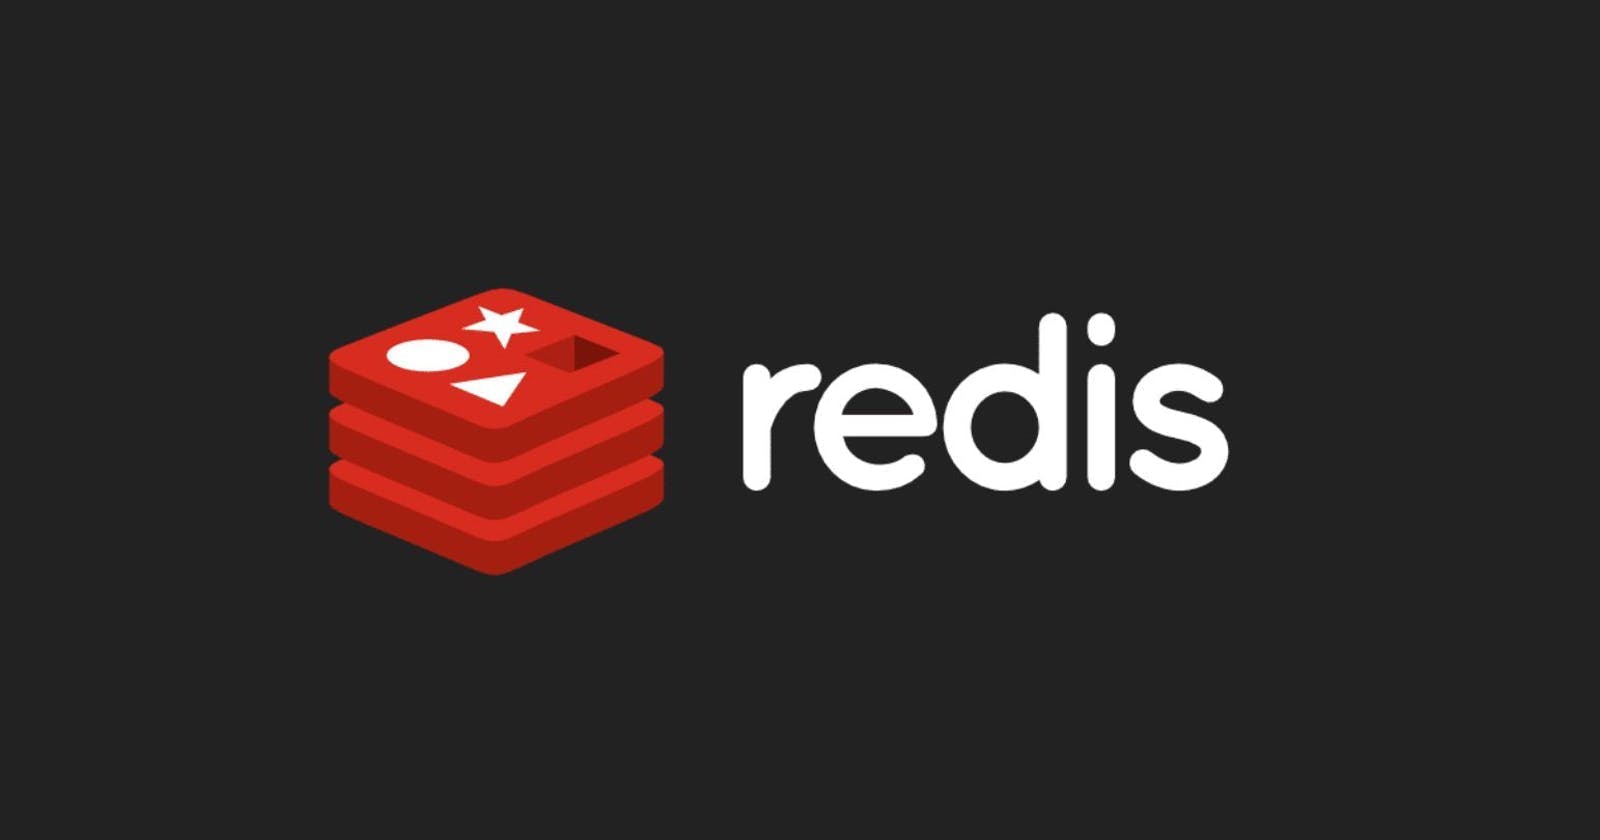 Getting Started With Redis And It's Data Types On Redis-CLI